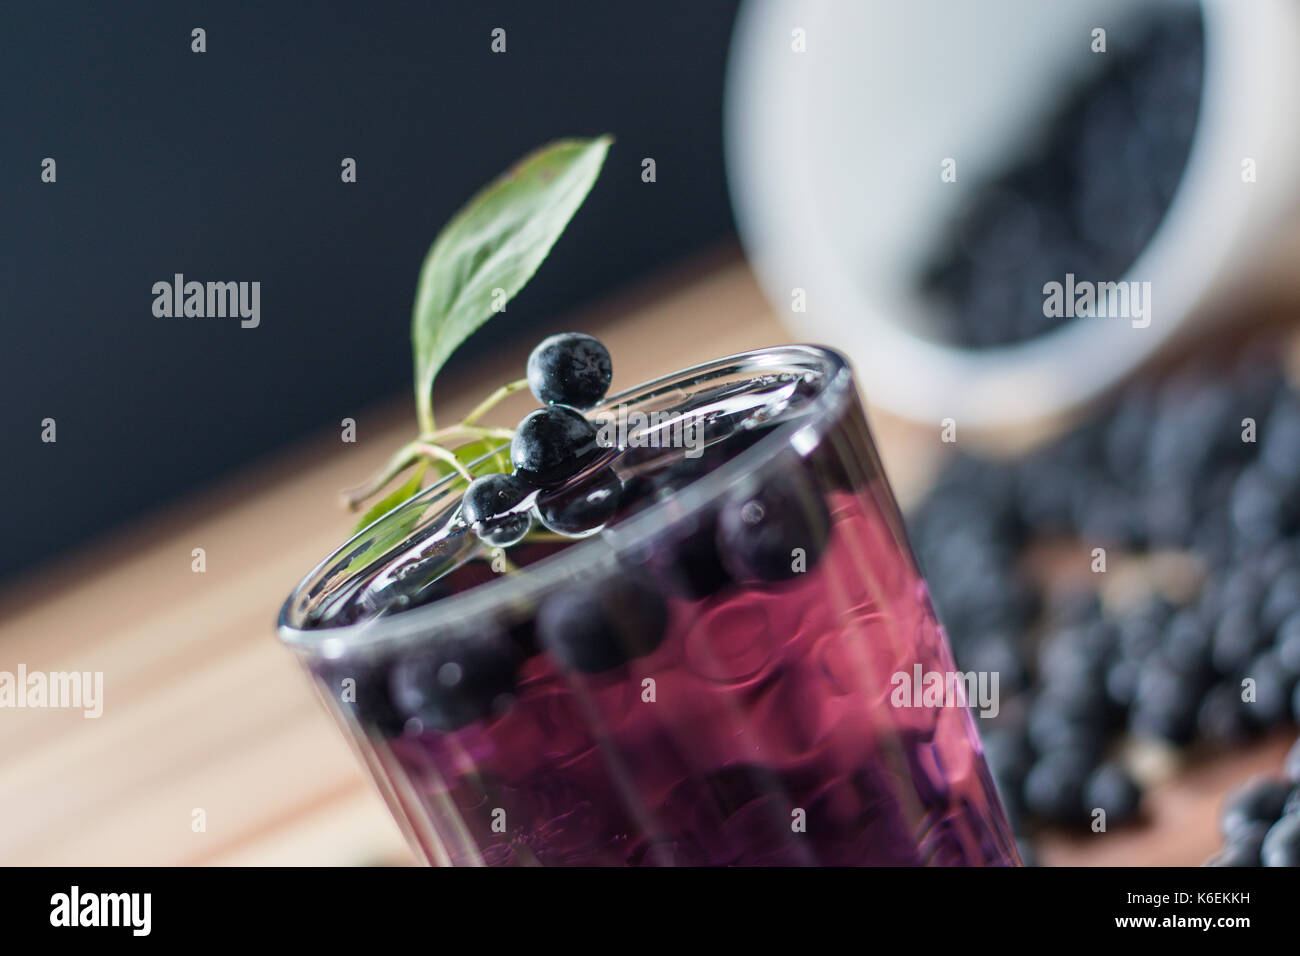 Bowl full of aronia spilled on wooden table with glass of aronia juice Stock Photo